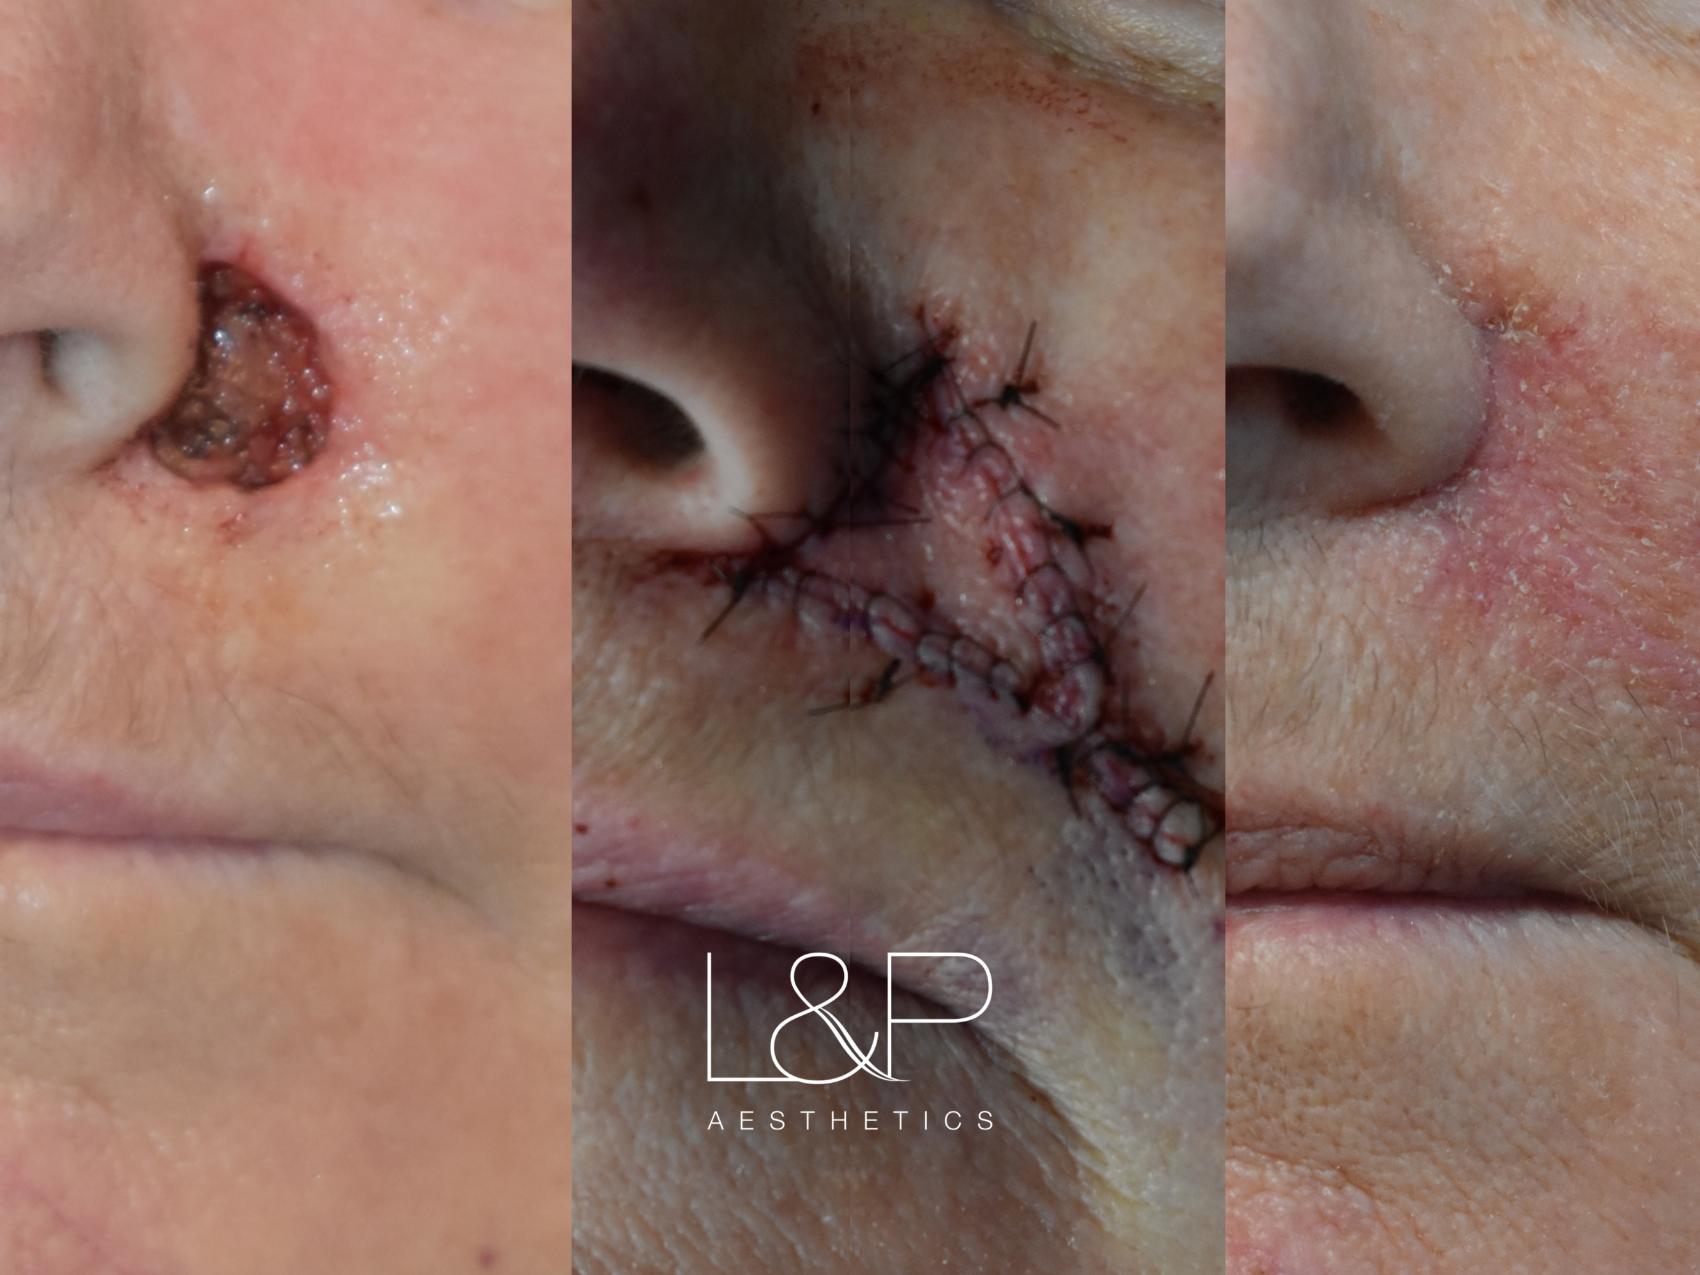 Reconstructive surgery for previous skin cancer patient